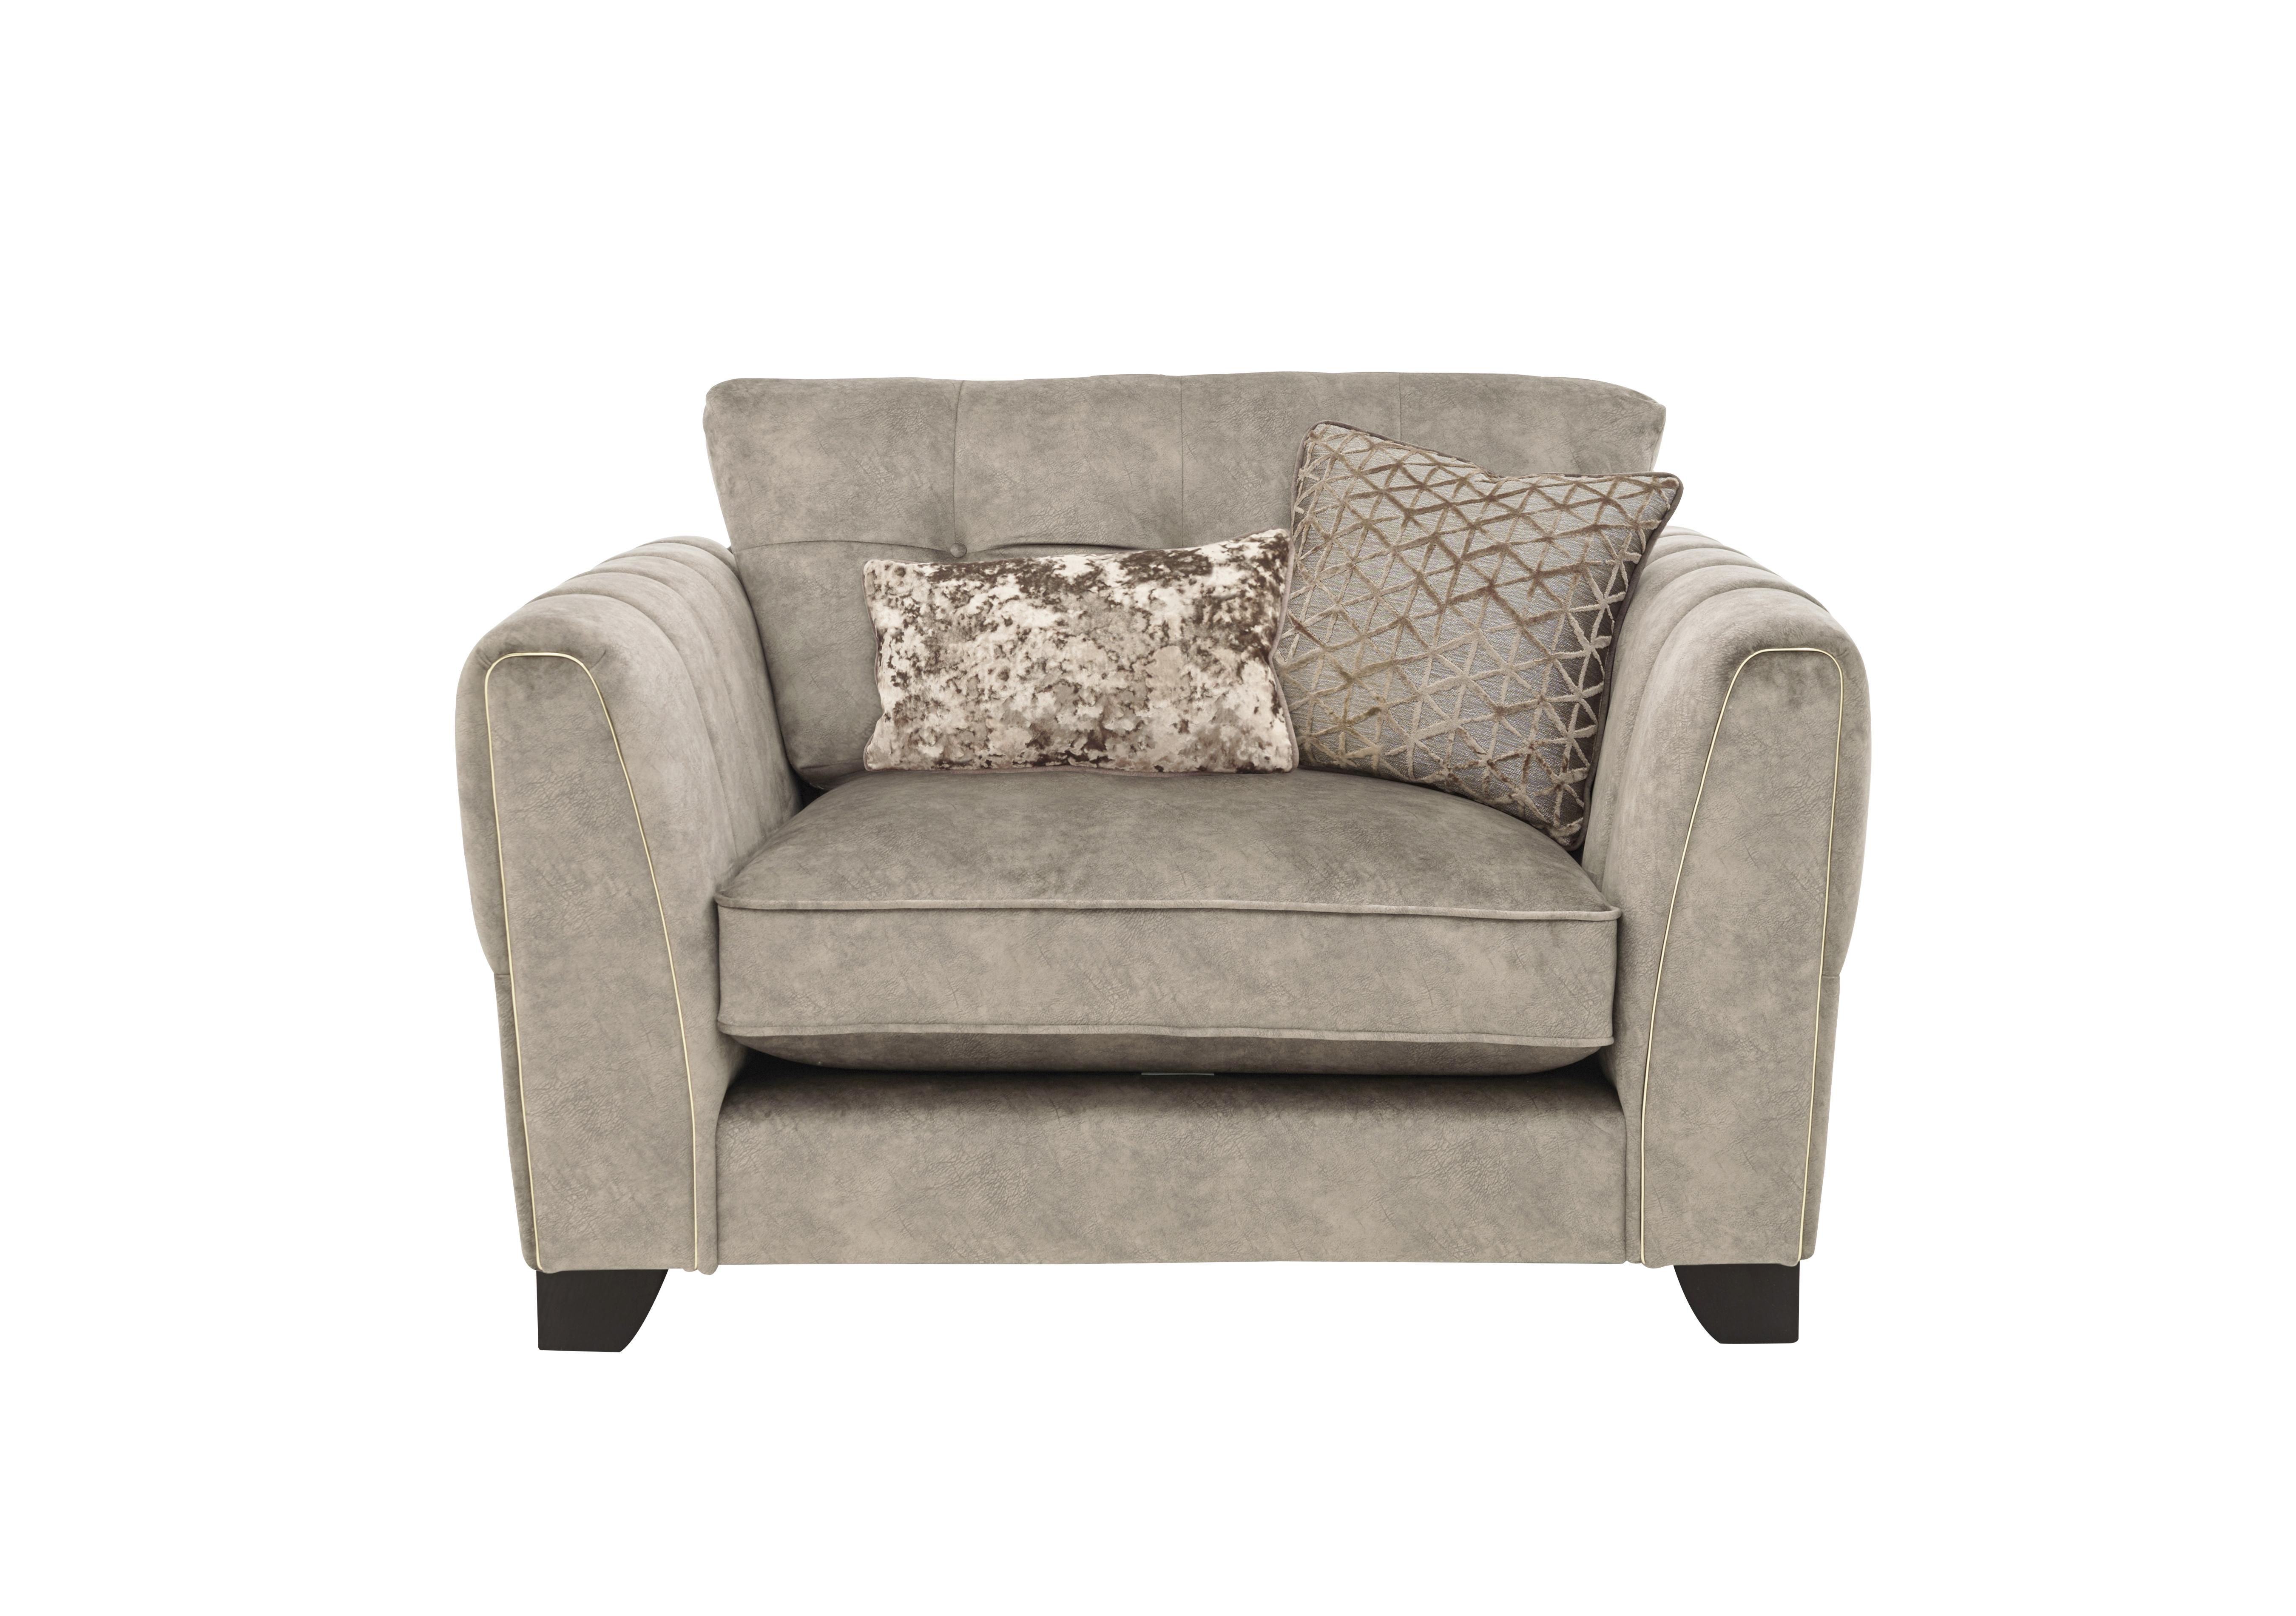 Ariana Classic Back Fabric Snuggler Chair in Dapple Oyster Brass Insert on Furniture Village